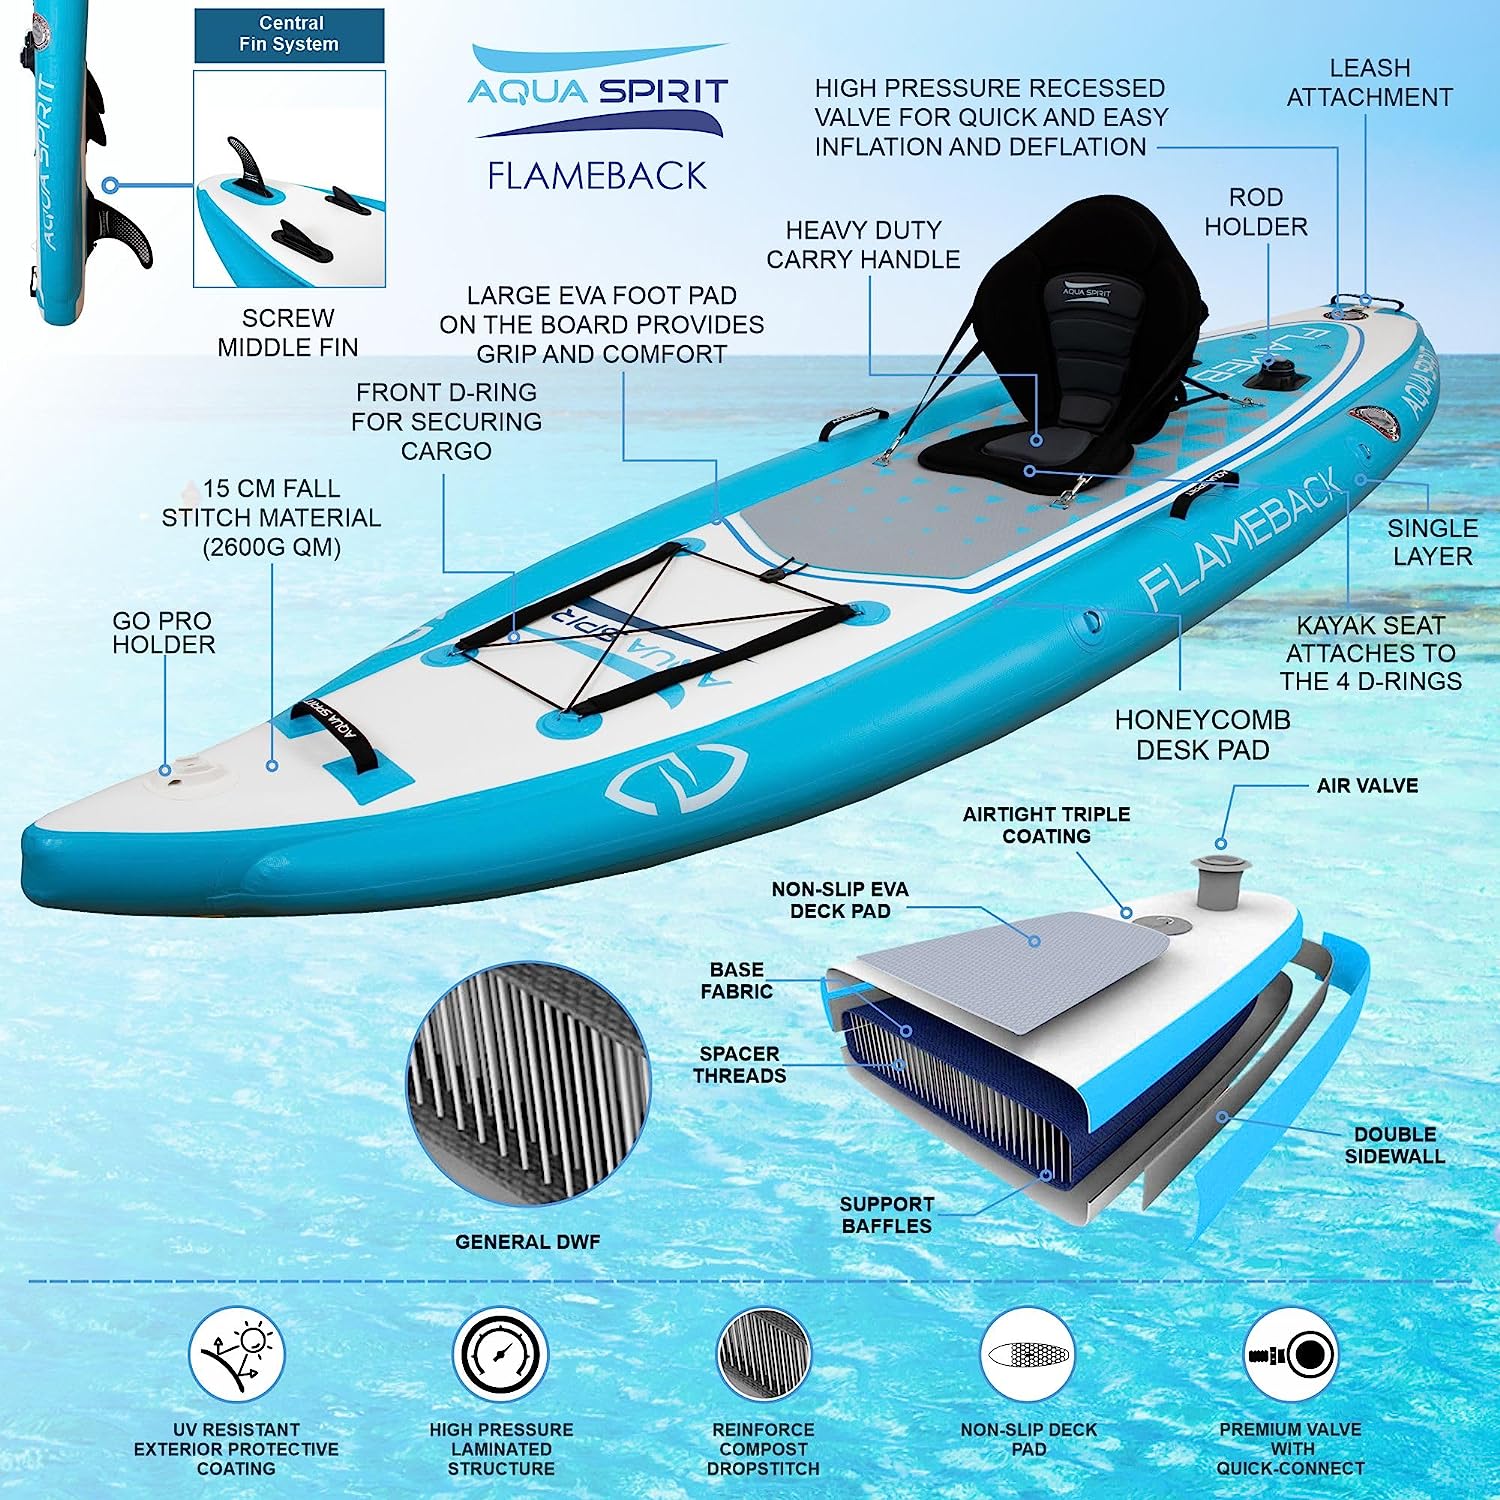 Aqua Spirit Flameback SUP Activity Inflatable Stand UP Paddle Board 2023 | 10'10”x39”x6” | Complete Kayak Conversion Kit with Fishing Rod Mounts, Paddle, Backpack, Pump and more accessories | Adult Beginners/Experts | 2 Year Warranty - Aqua Spirit iSUPs UK